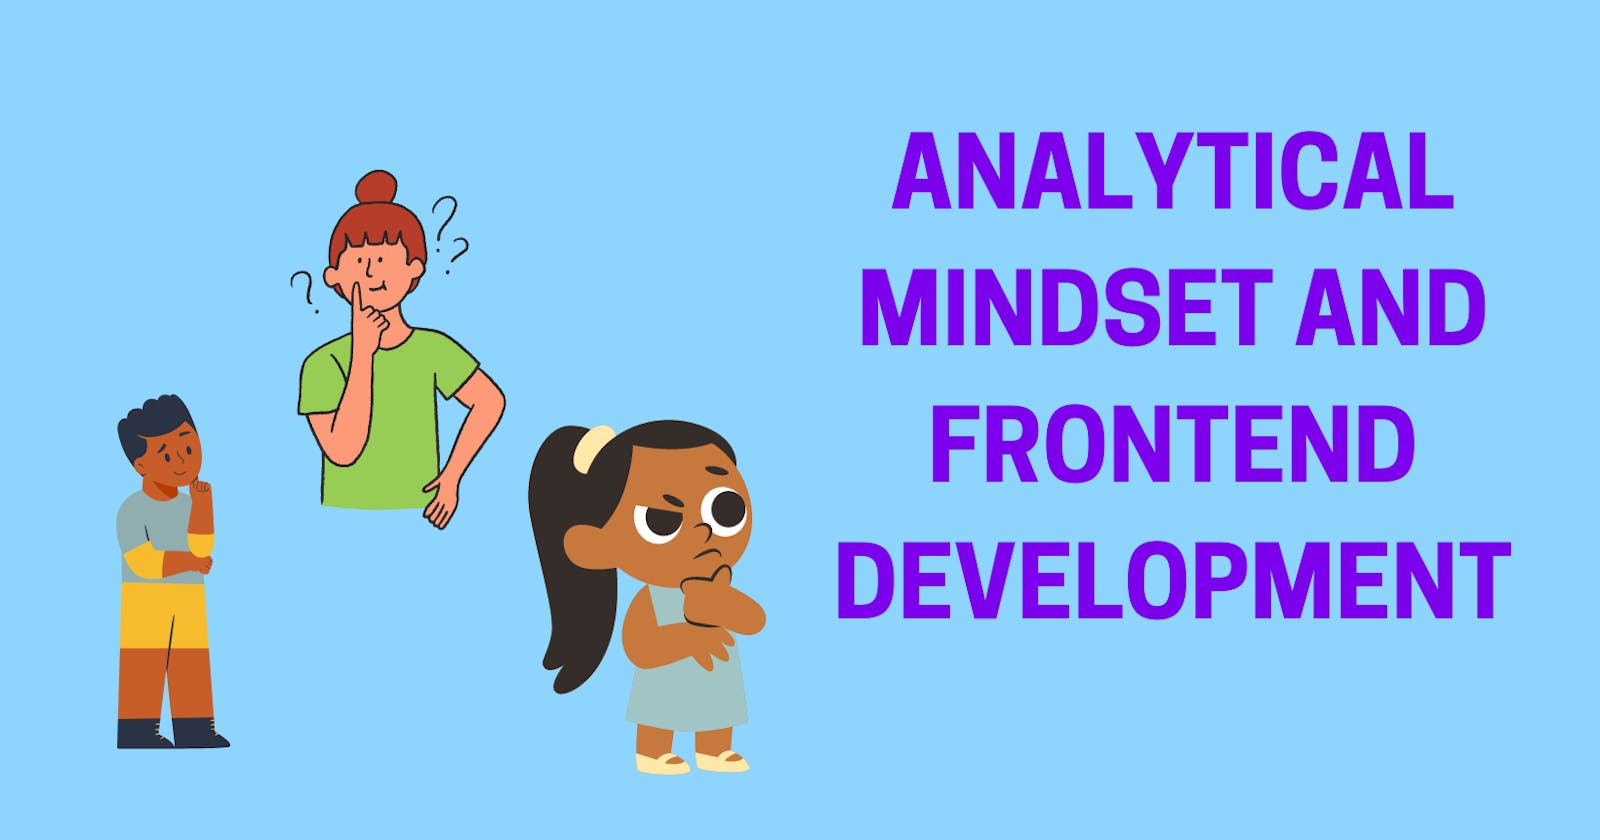 Analytical Mindset And Frontend Development